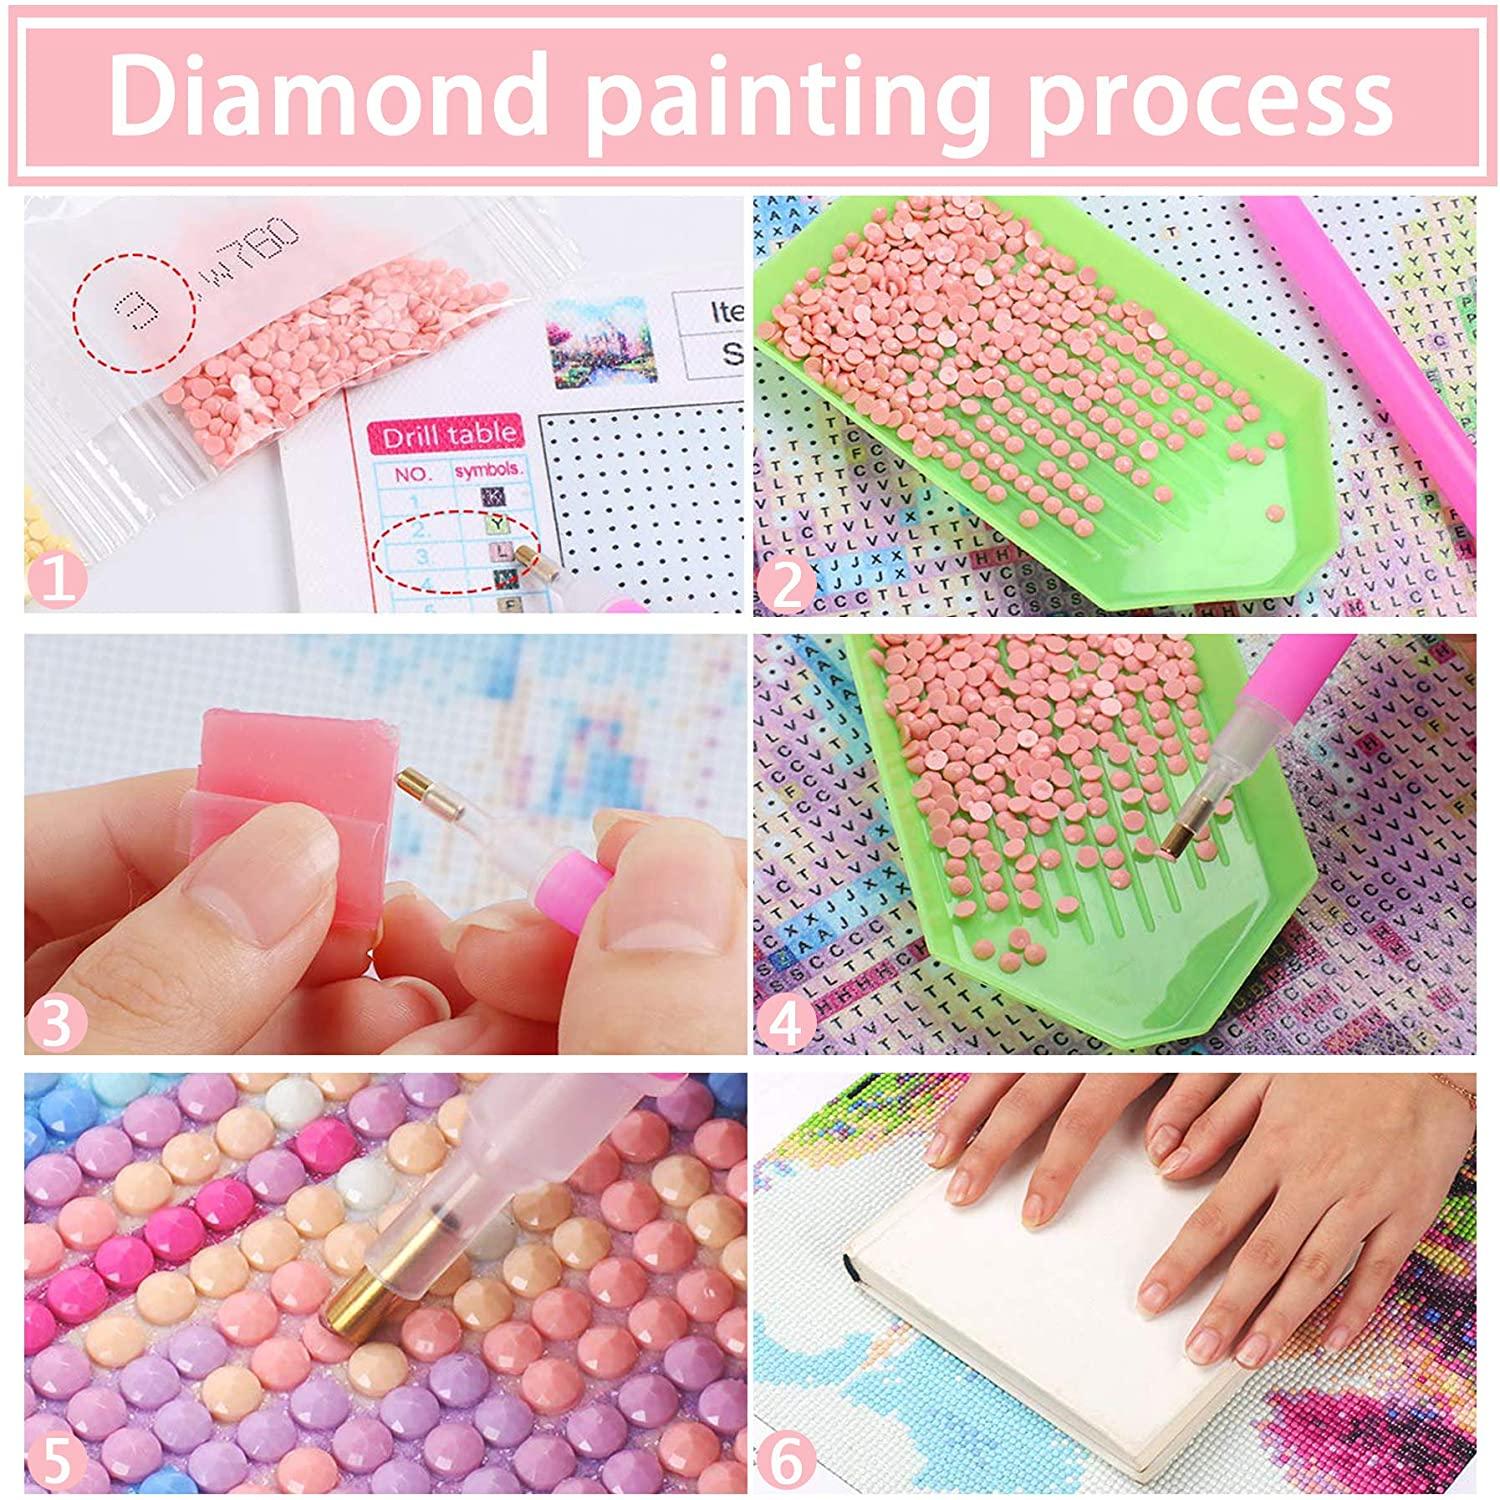 Bimkole 5D Diamond Painting Moon Alphabet Full Drill by Number Kits DIY Rhinestone Pasted 12x16inch